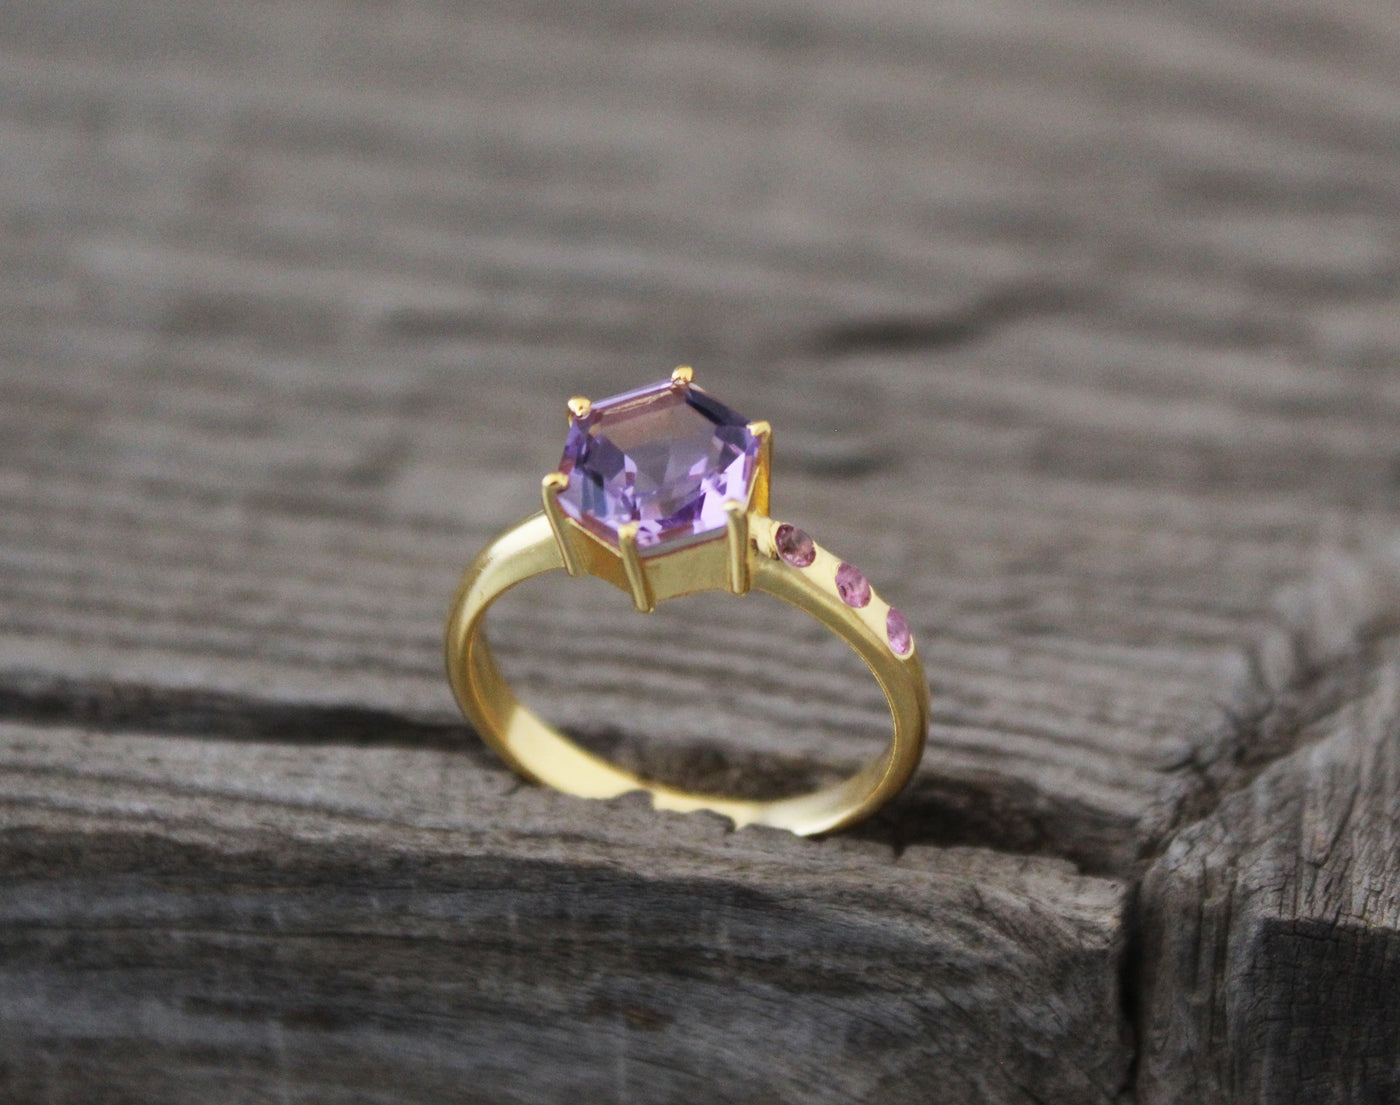 Natural Amethyst Ring,Gold Filled Ring, Purple Amethyst Ring, Hexagon Ring, February Birthstone, Anniversary Gift, Gift for Wife, Prong Ring